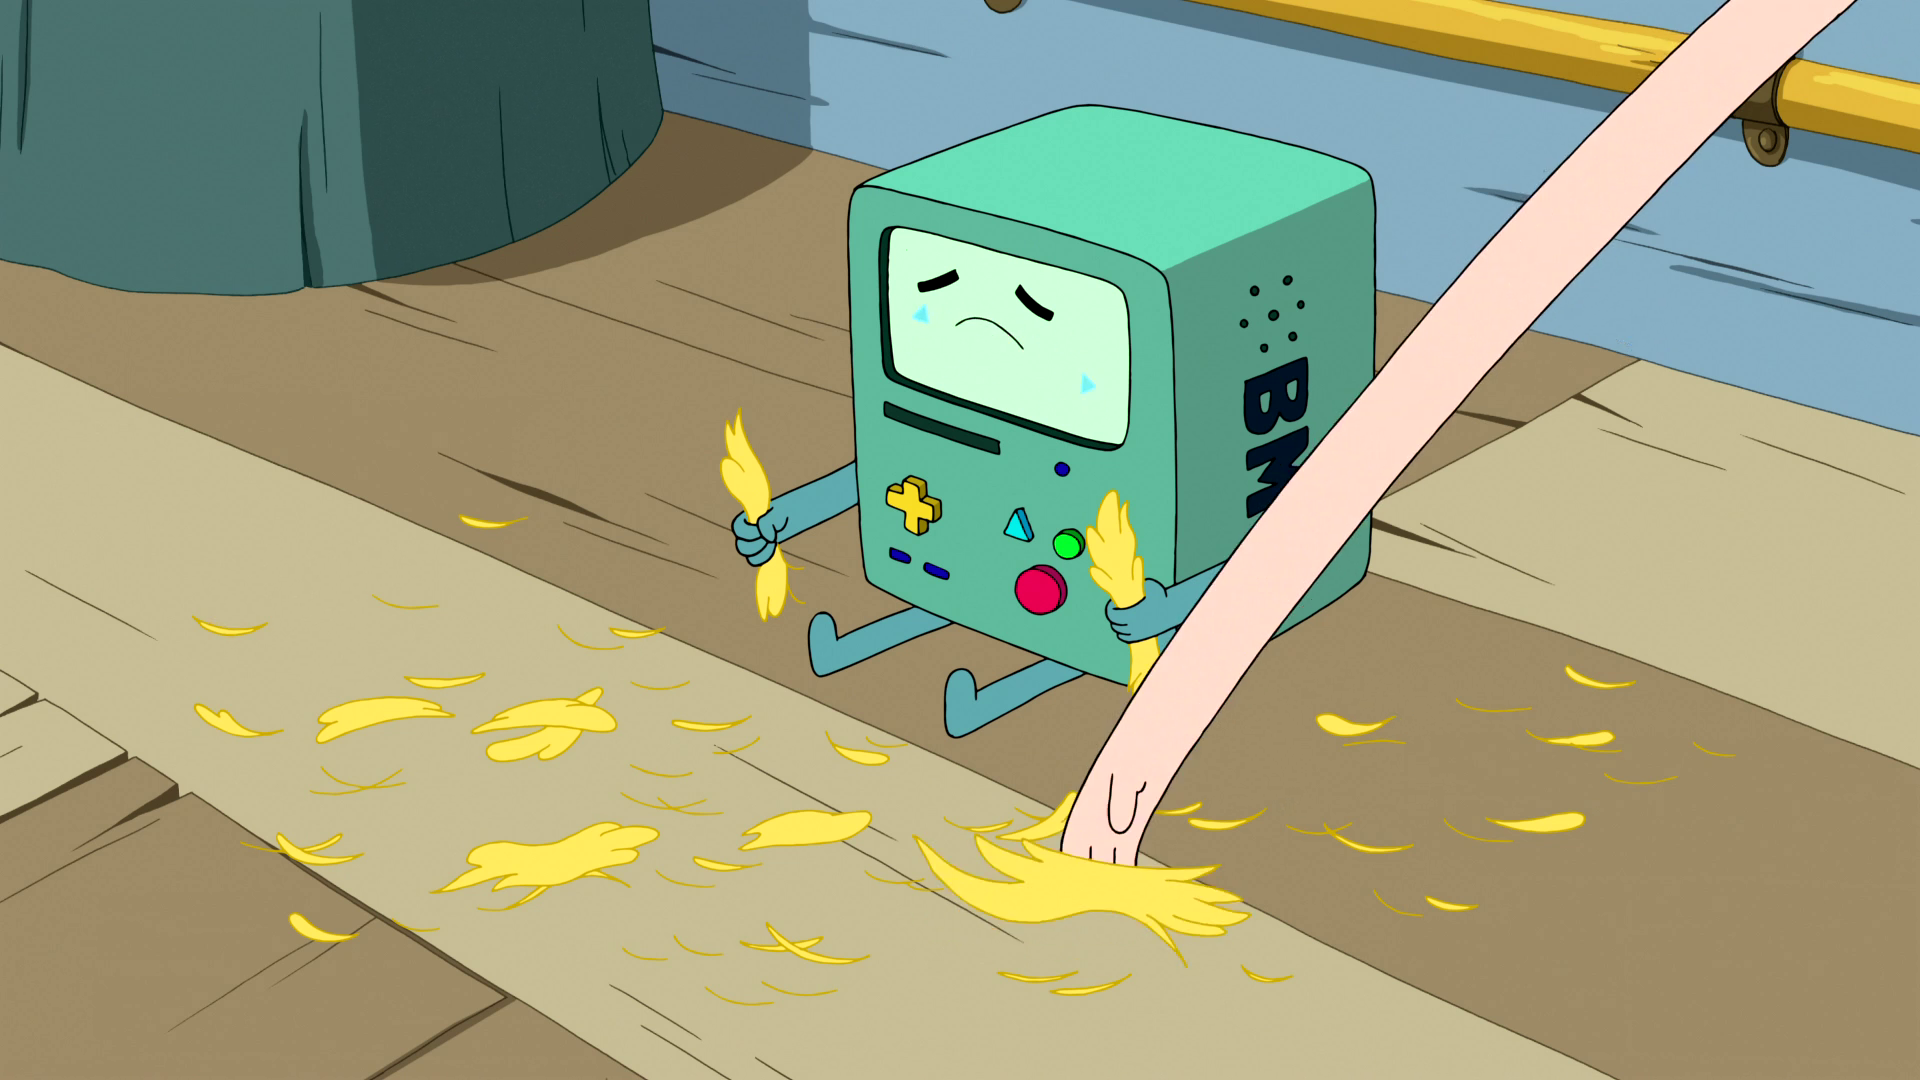 Image Bmo Sadpng The Adventure Time Wiki Mathematical, bmo adventure time s...